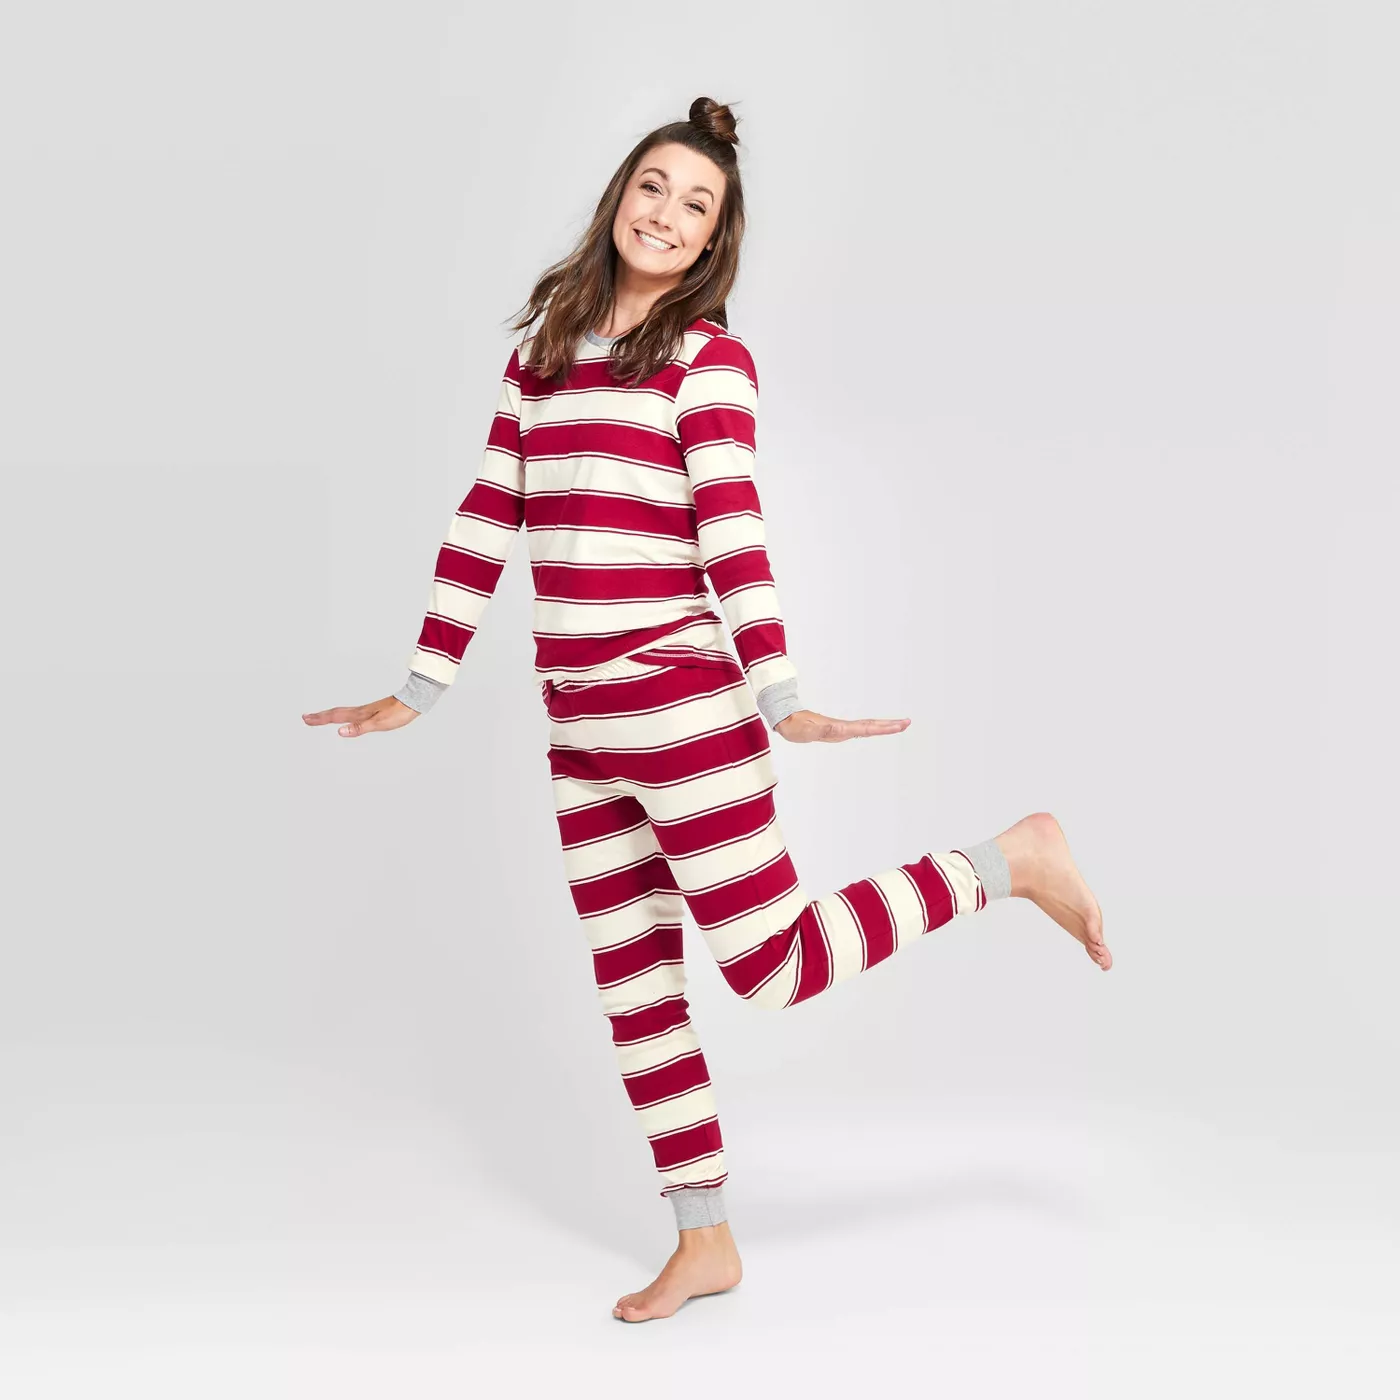 Burt’s Bees Baby® Women's Holiday Rugby Striped Pajama Set - Red 